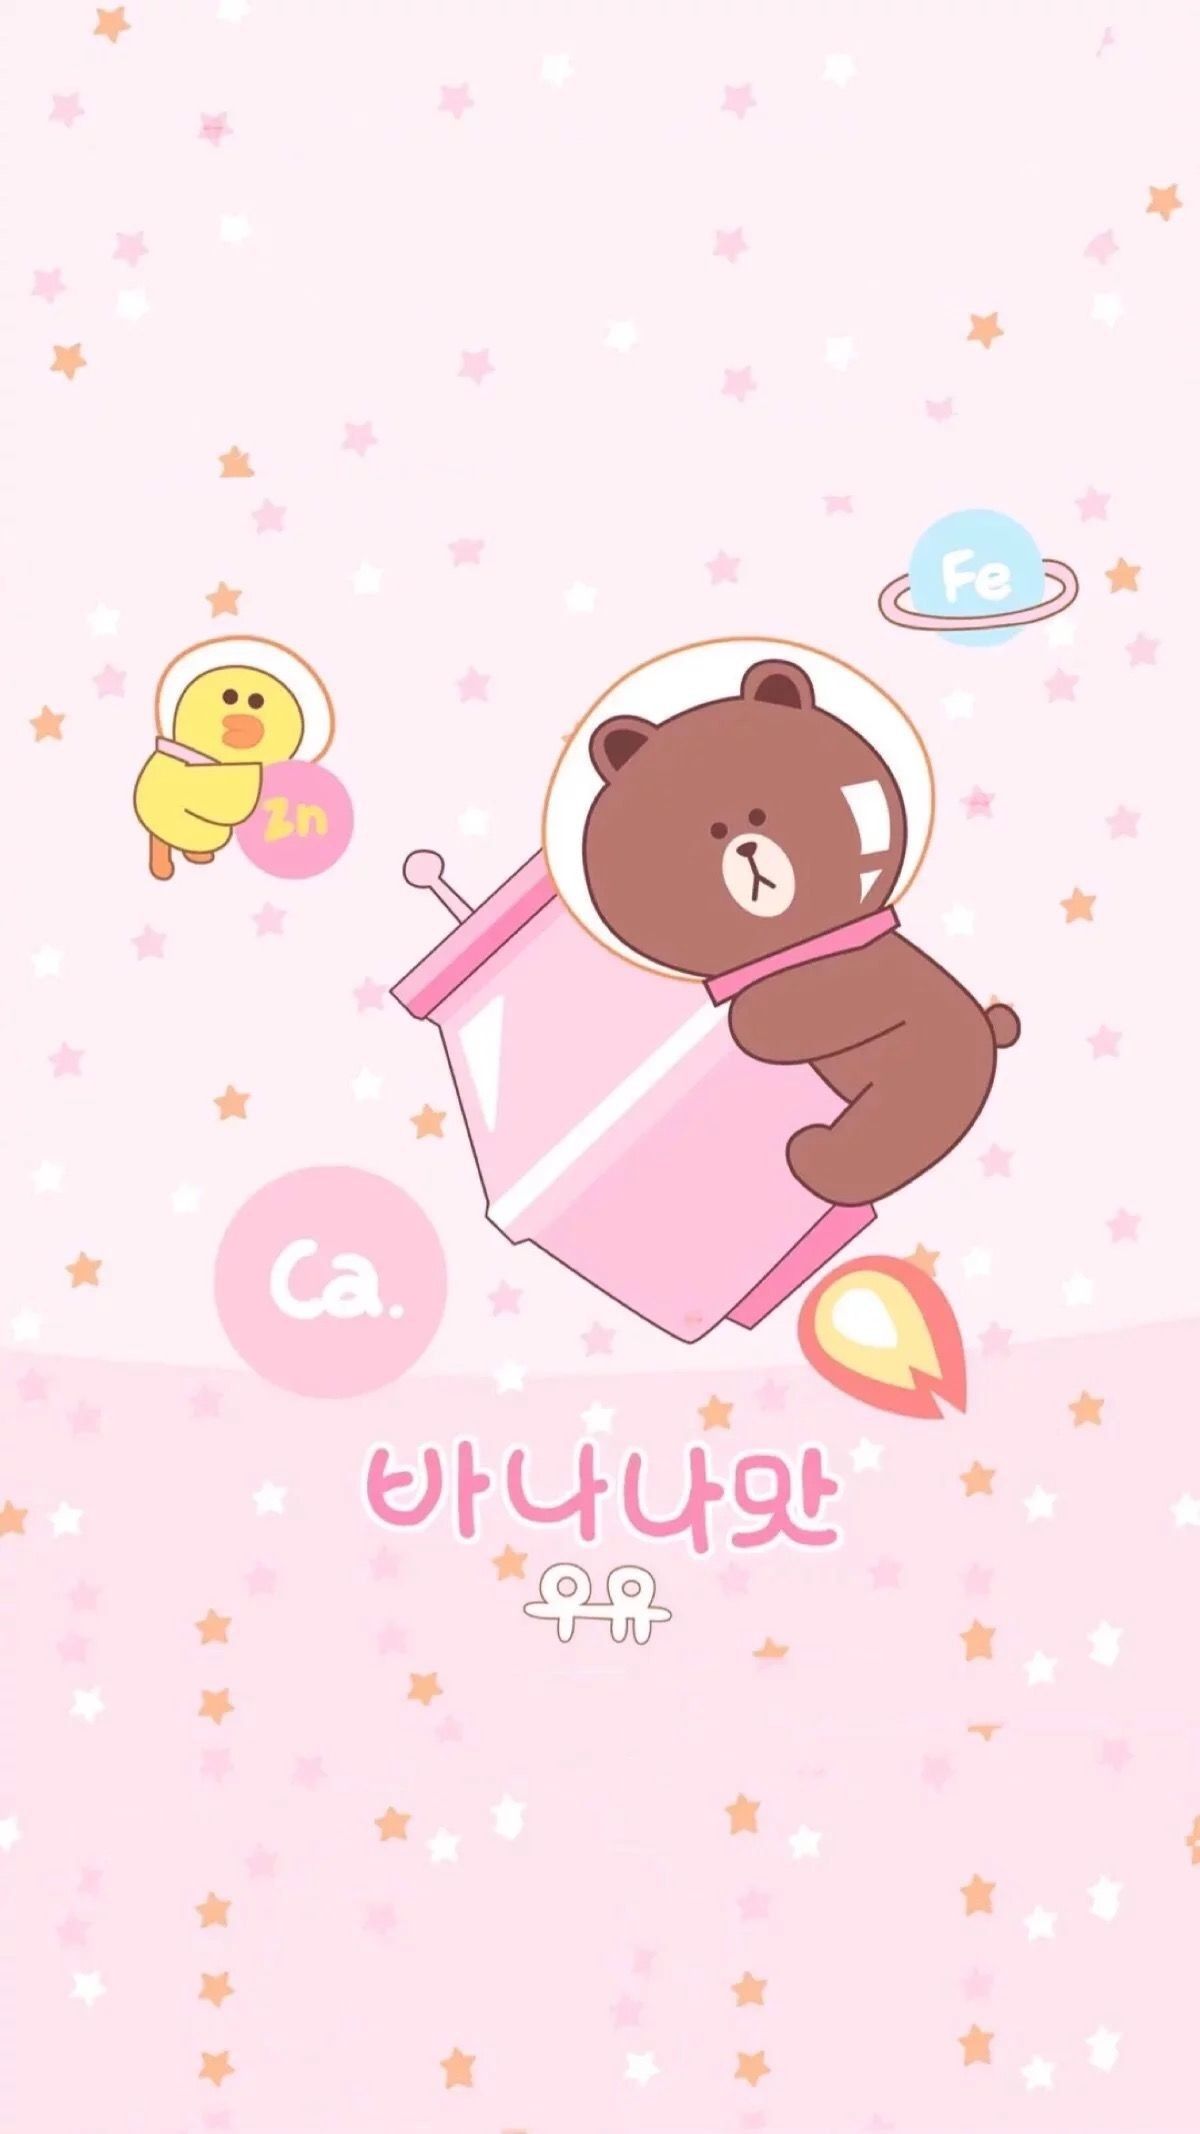 A cute wallpaper of a brown bear riding a pink rocket ship with a yellow chick on the front. - Bestie